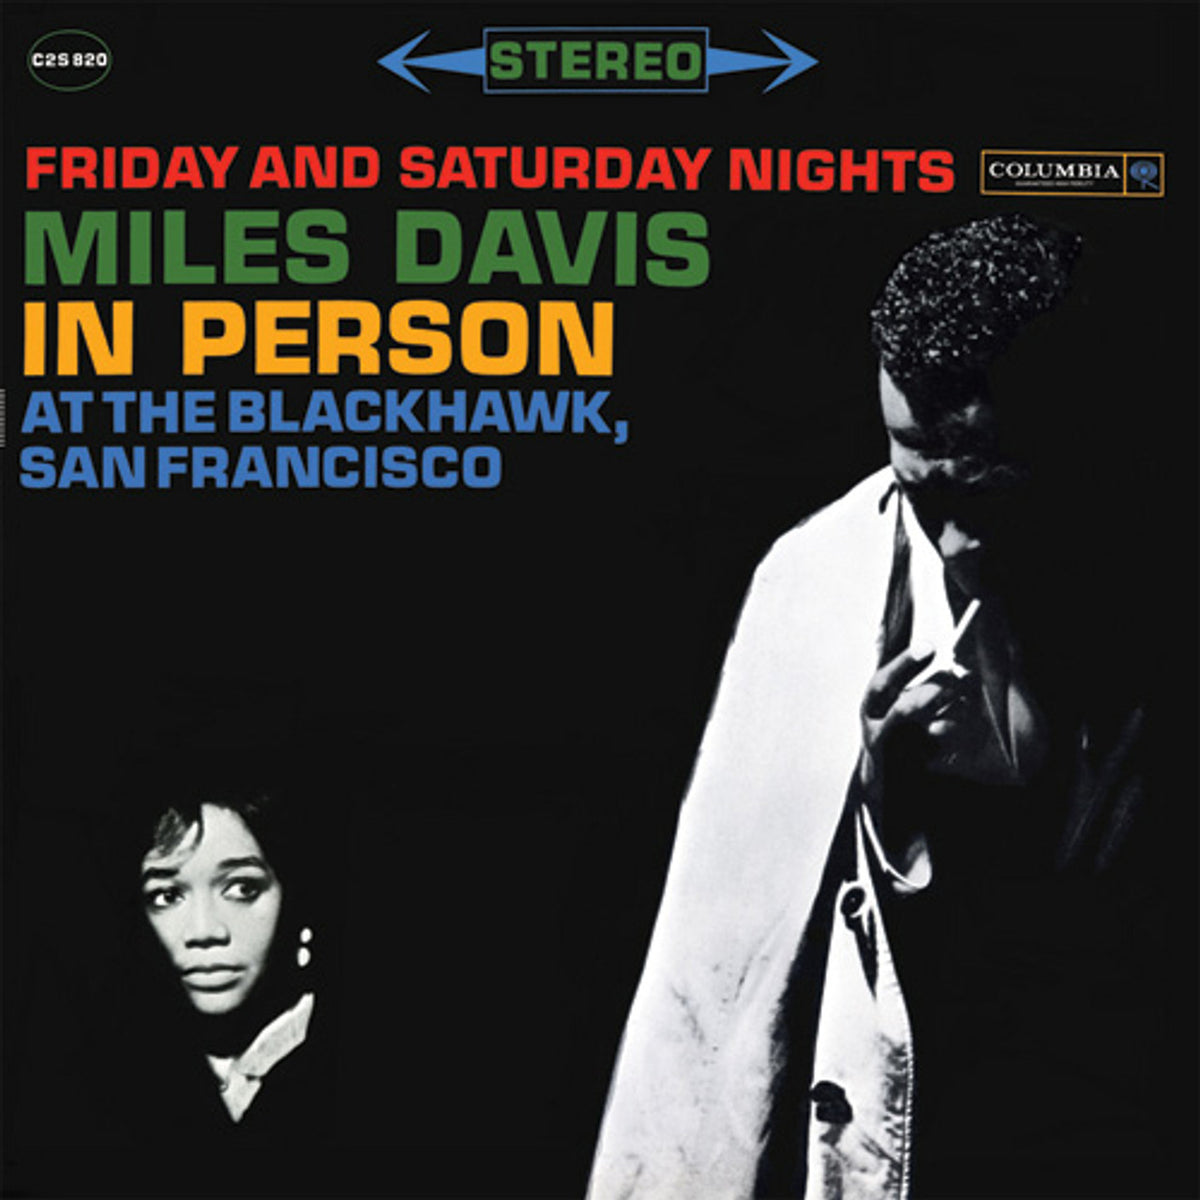 Miles Davis - In Person At The Blackhawk, San Francisco Friday And Saturday Nights 2LP (Impex Audiophile 180g 2LP)